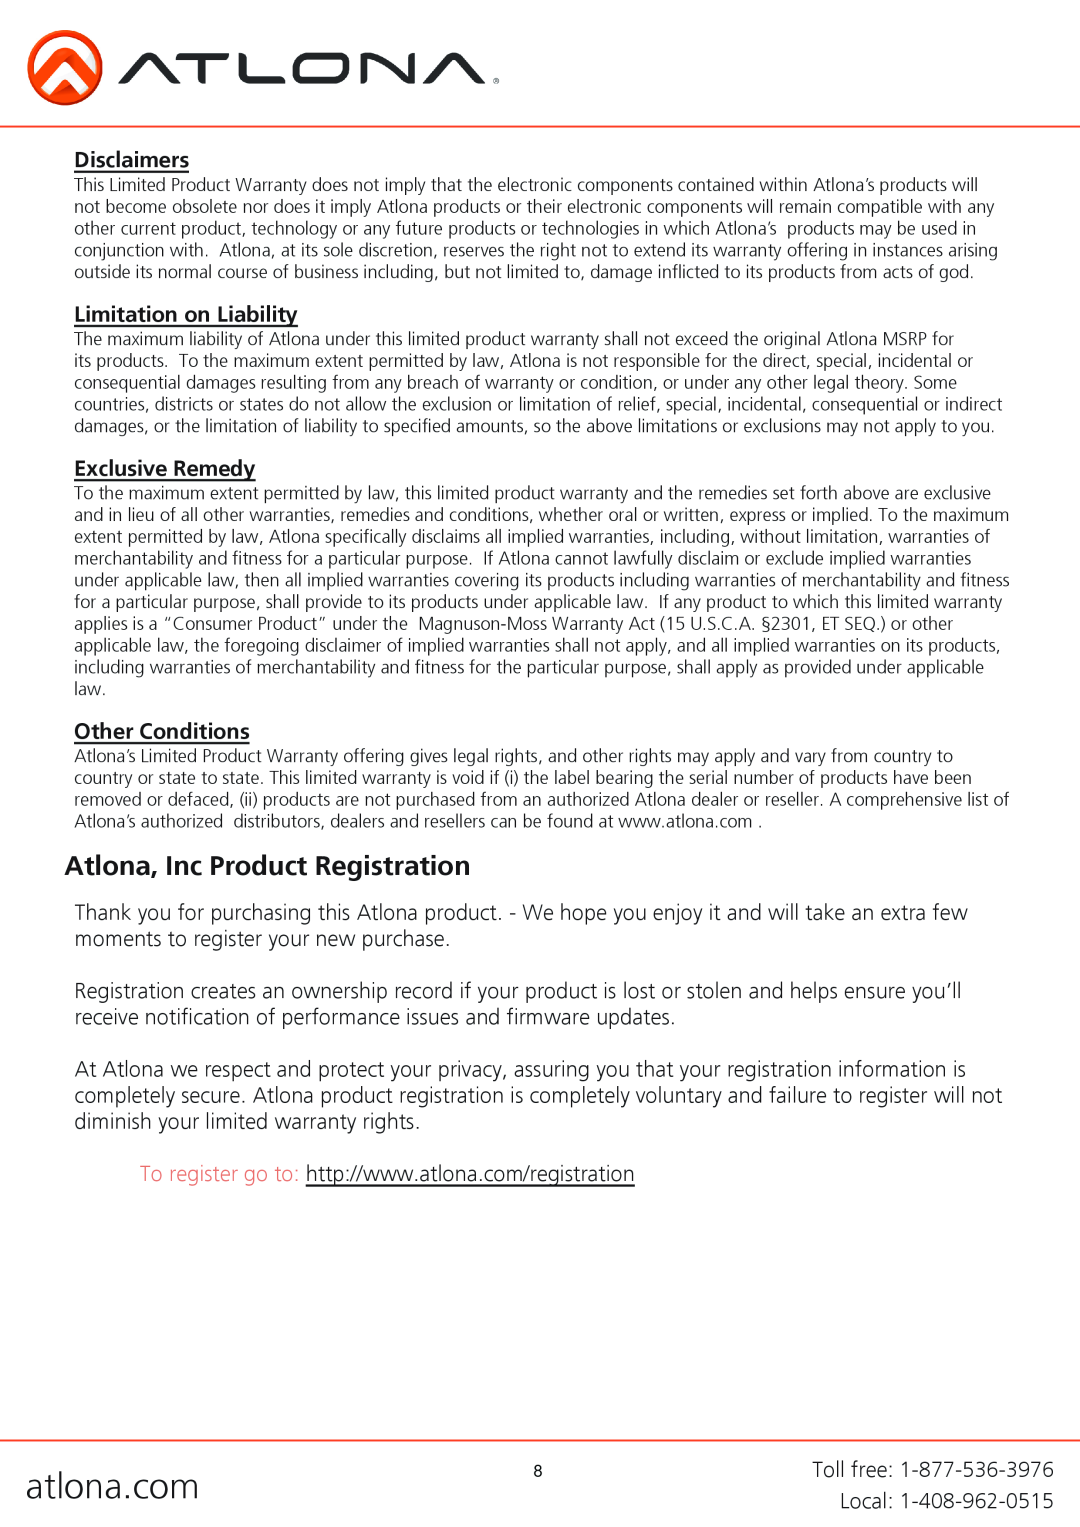 Atlona AT-HD420 Atlona, Inc Product Registration, Disclaimers, Limitation on Liability, Exclusive Remedy, Other Conditions 